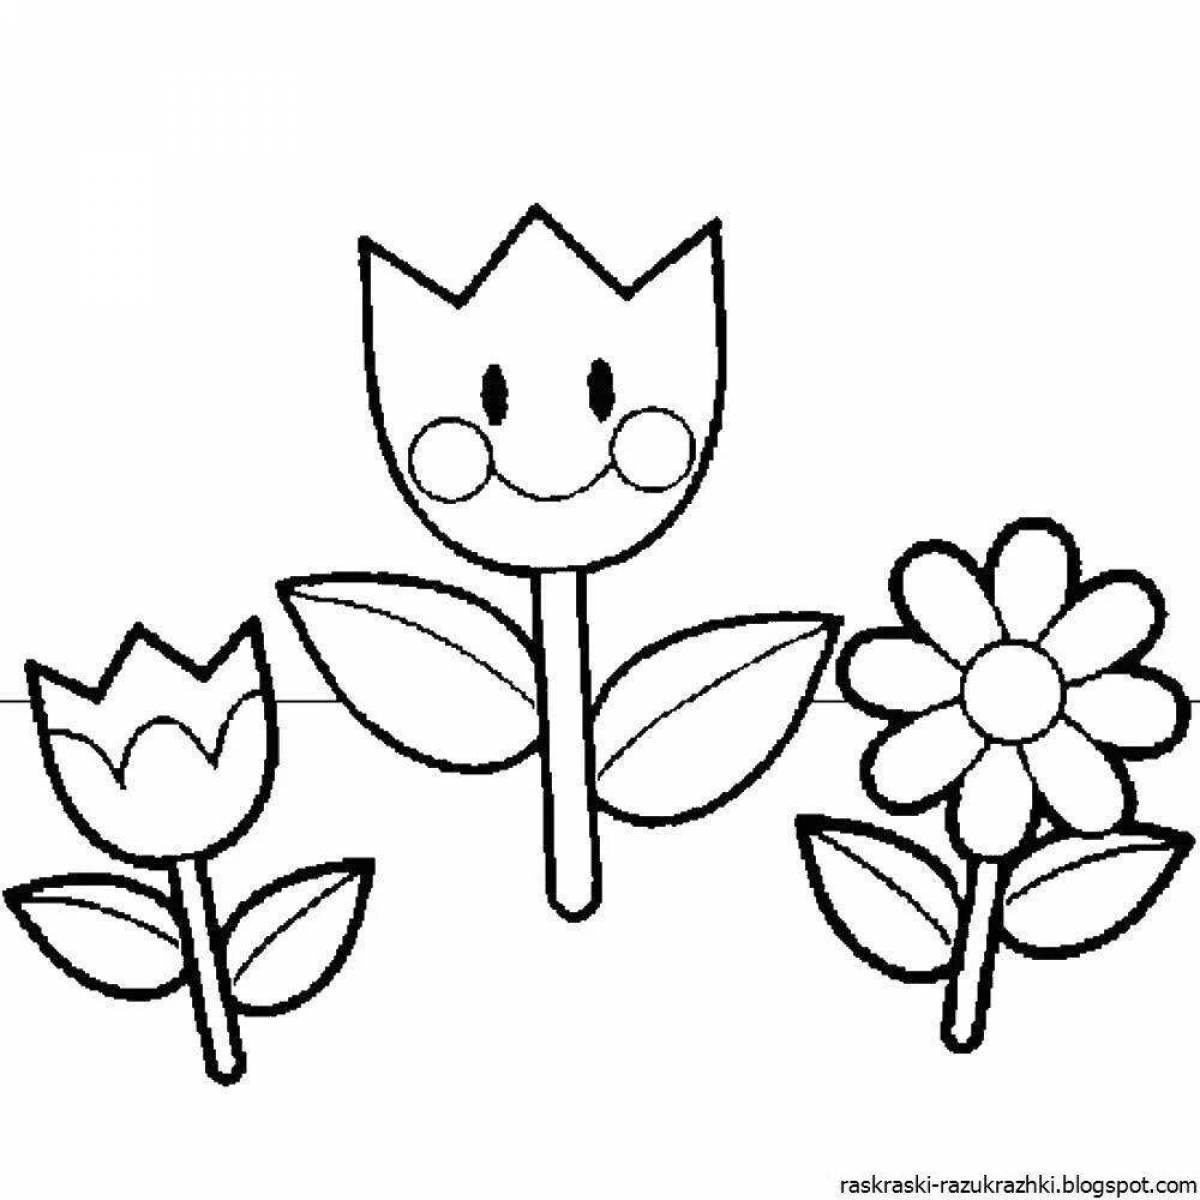 Bright coloring page flowers light